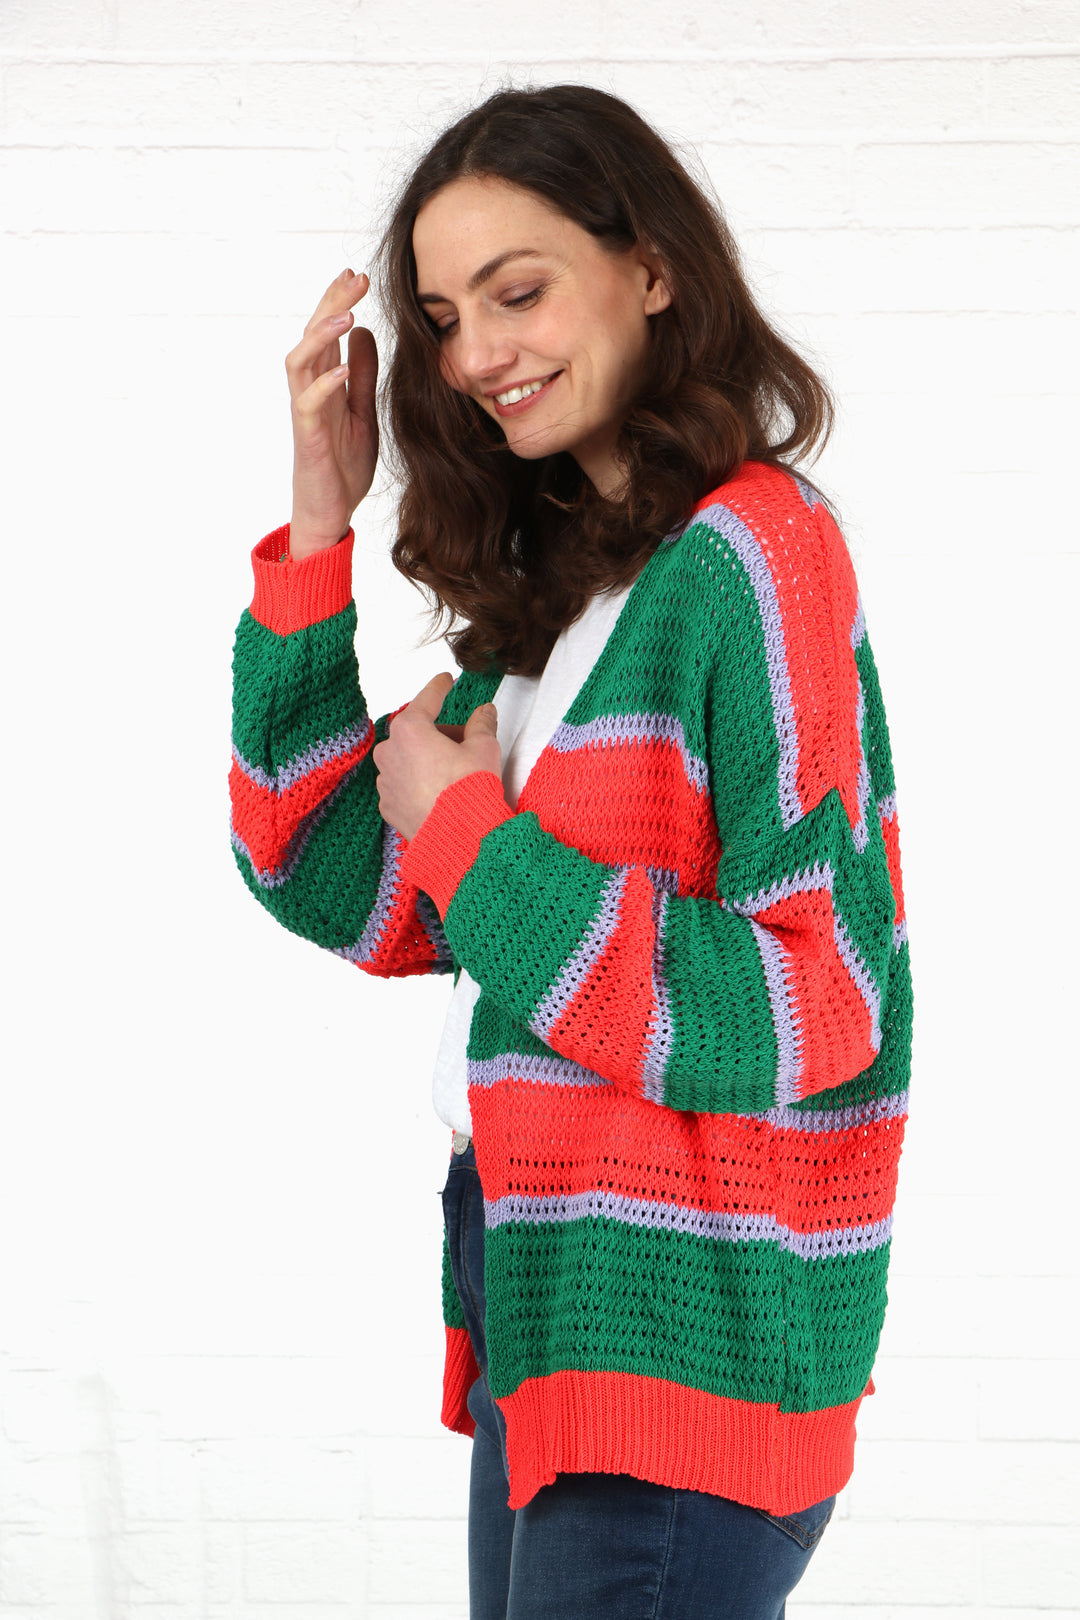 model showing the side view of the open knit cardigan showing an all over pattern